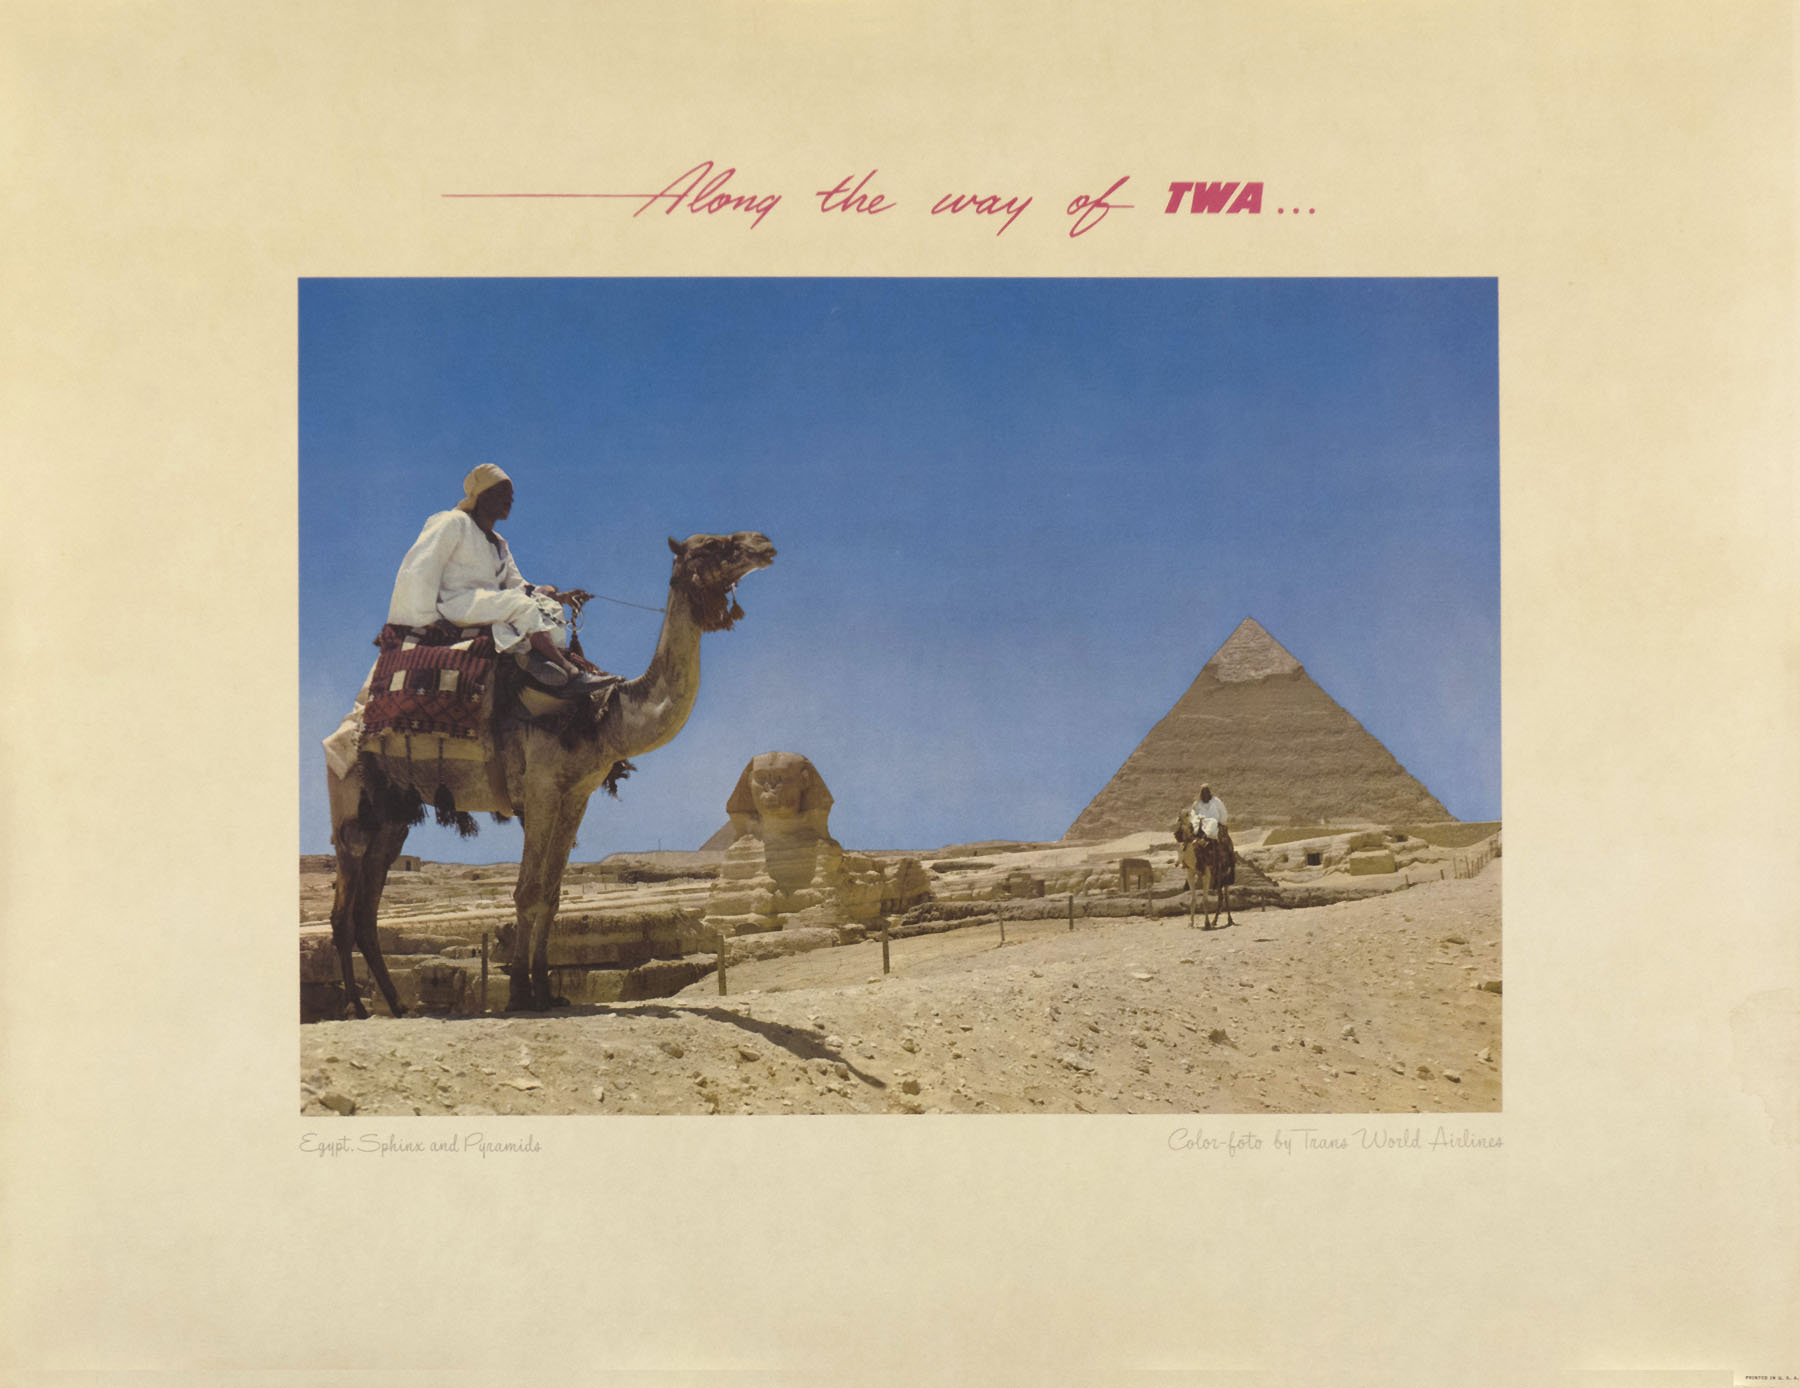 Along the way of TWA... Egypt Sphinx and Pyramids